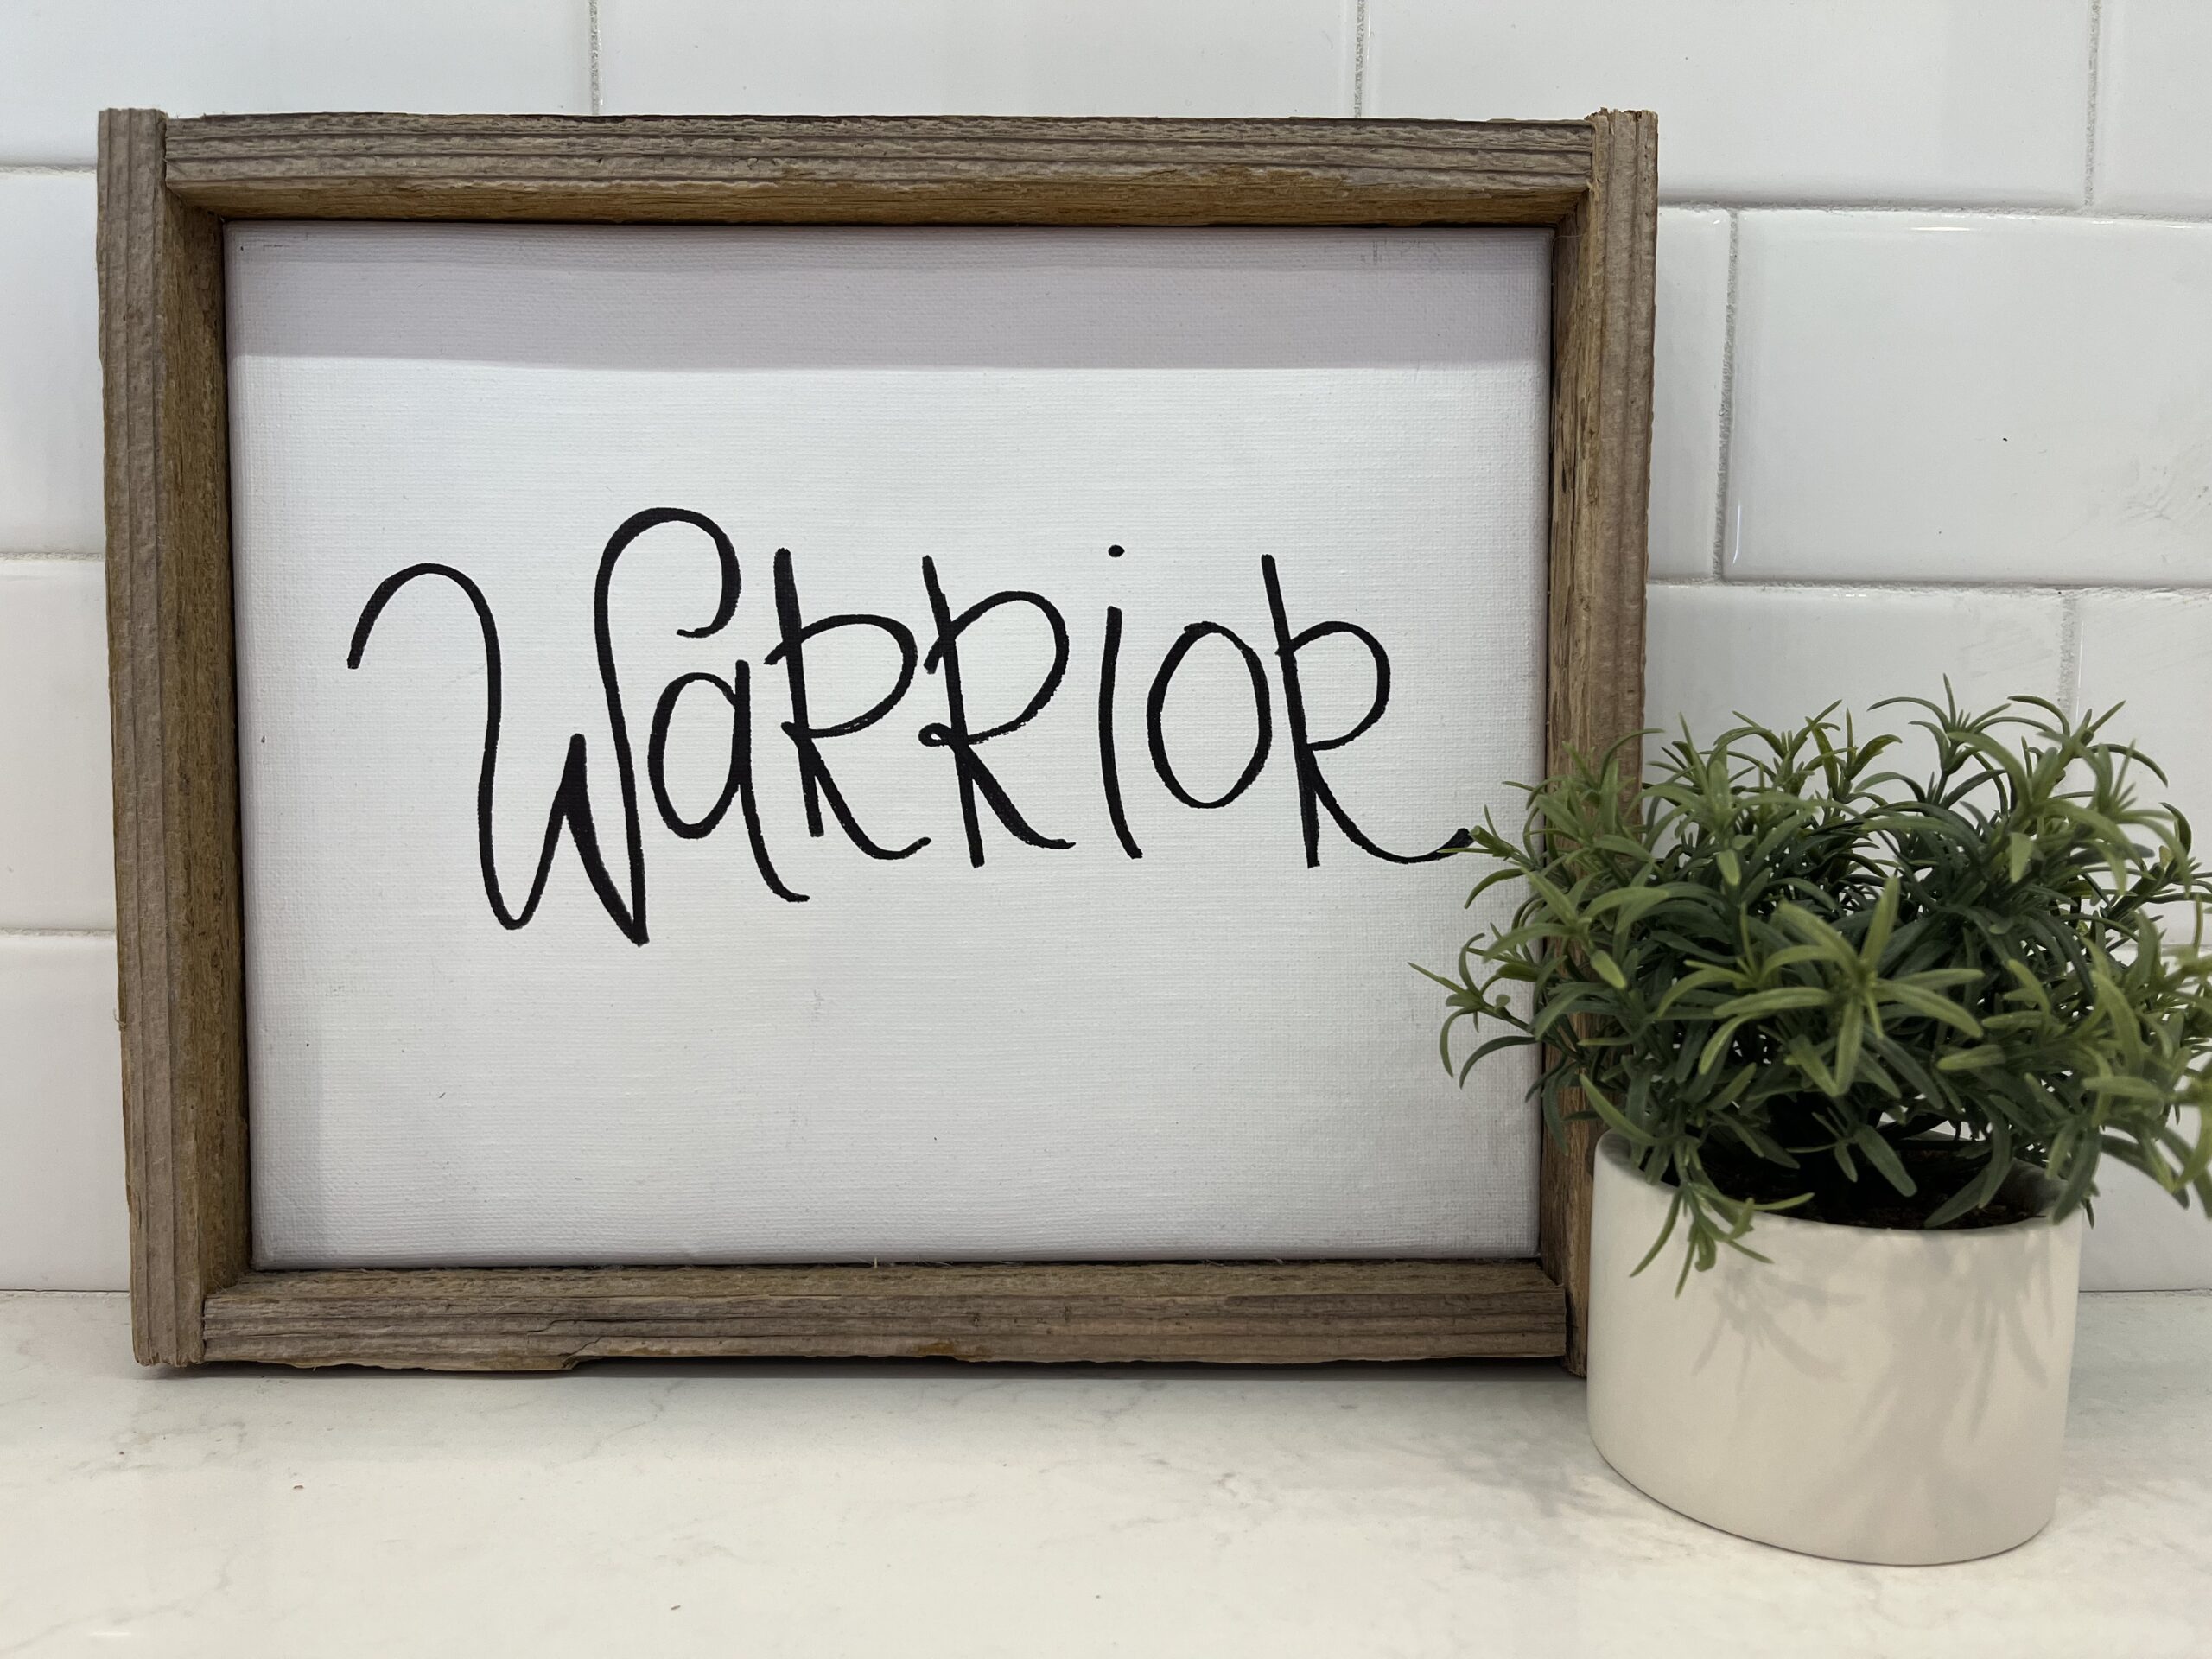 decoration with the word "warrior" and a small succulent against a white backdrop